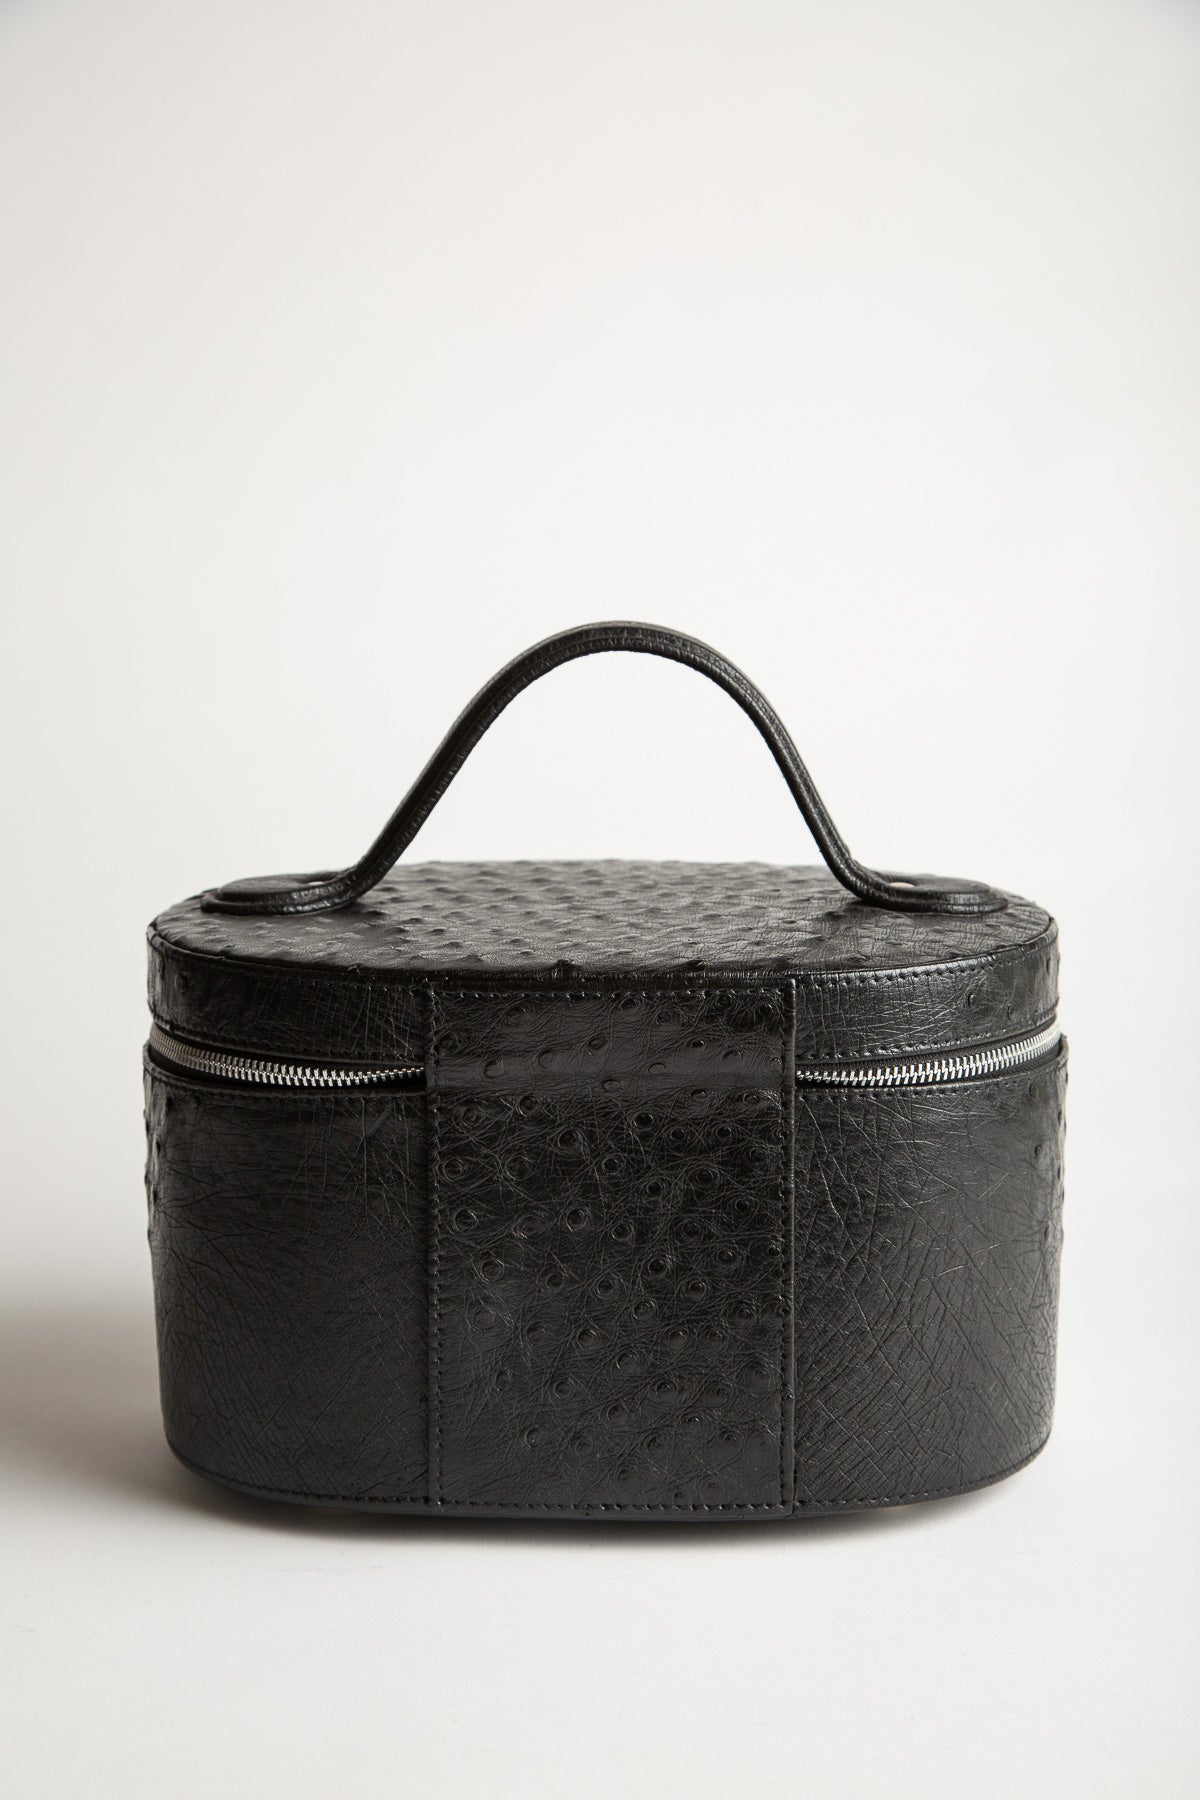 MAXFIELD PRIVATE COLLECTION | OVAL VANITY CASE